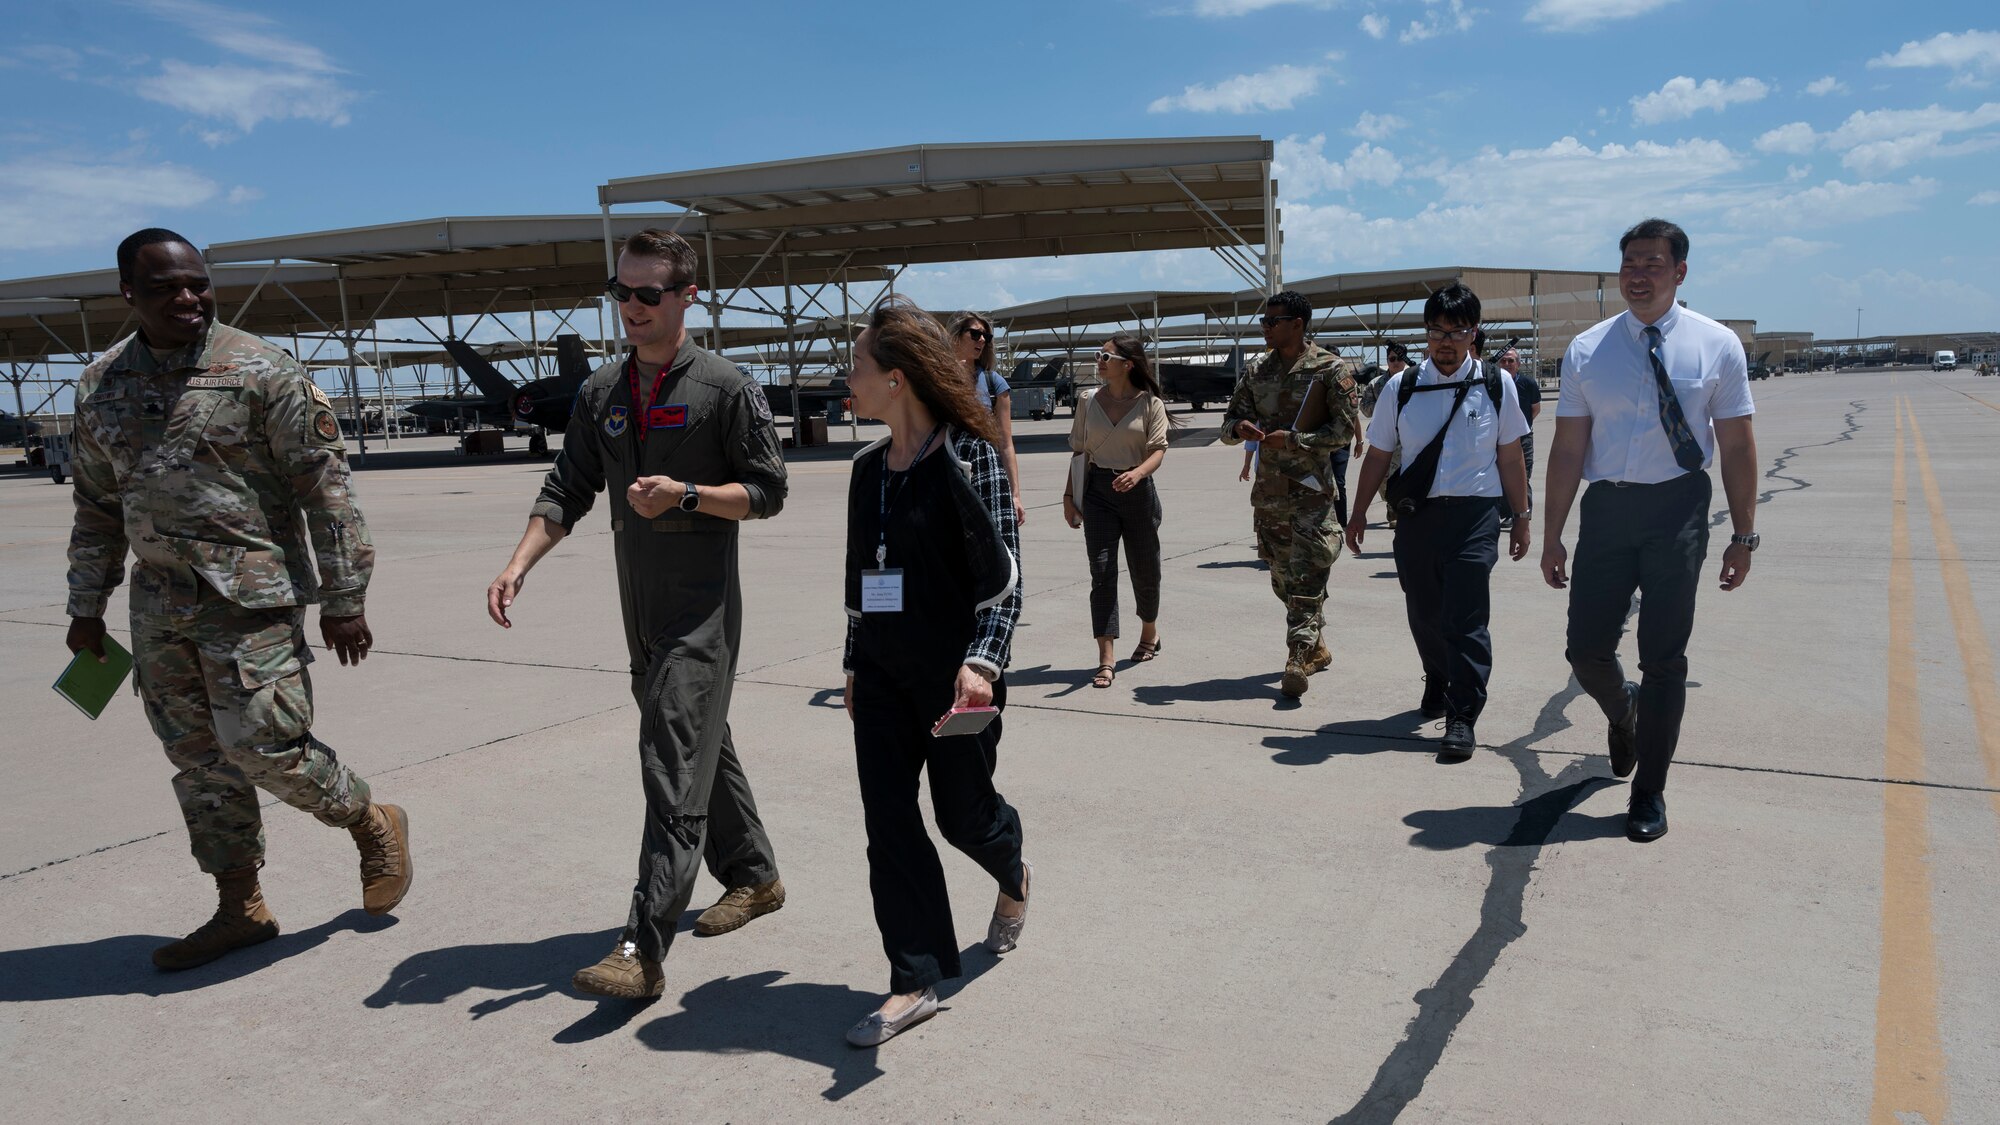 56th Fighter Wing personnel and Japanese civic leaders part of the U.S. Department of State’s International Visitor Leadership Program walk on the flightline at Luke Air Force Base, Arizona, on Aug. 2, 2023.